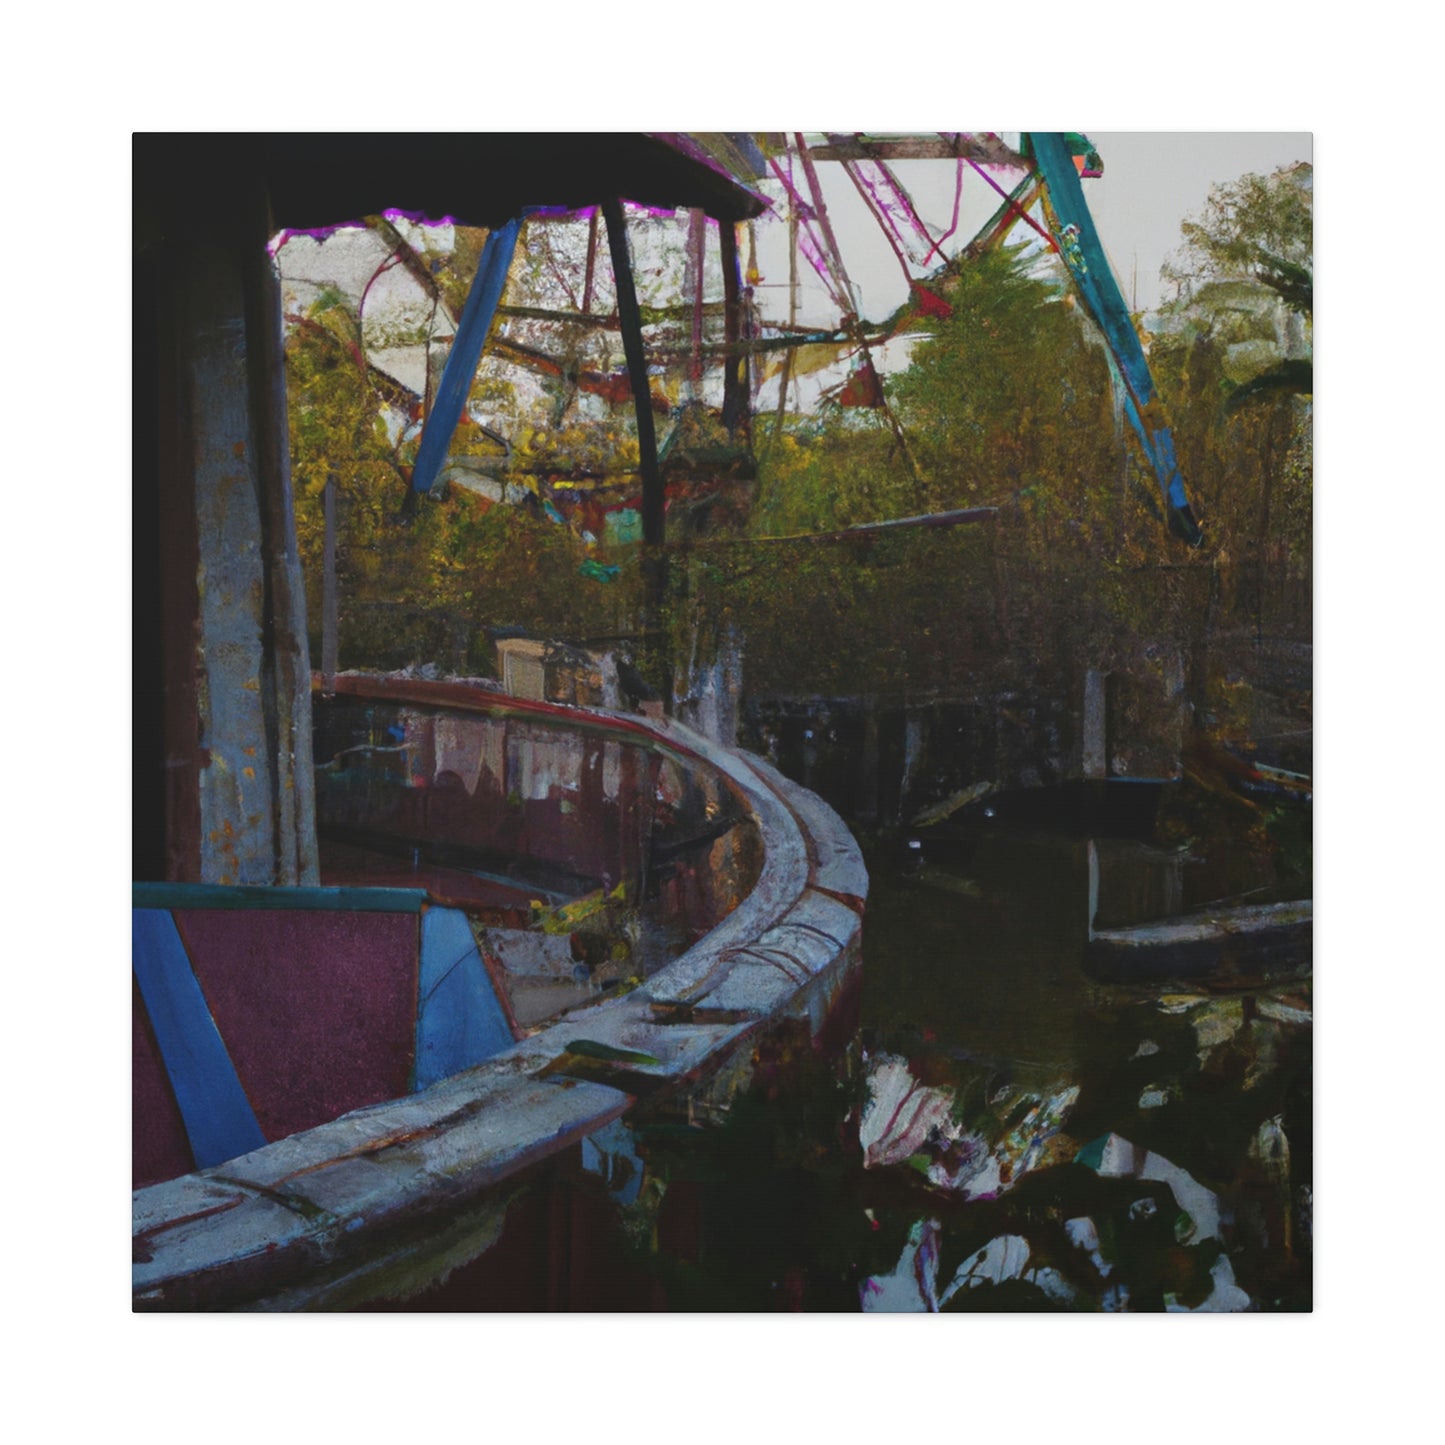 "Lost in the Funhouse: Exploring the Abandoned Amusement Park" - The Alien Canva